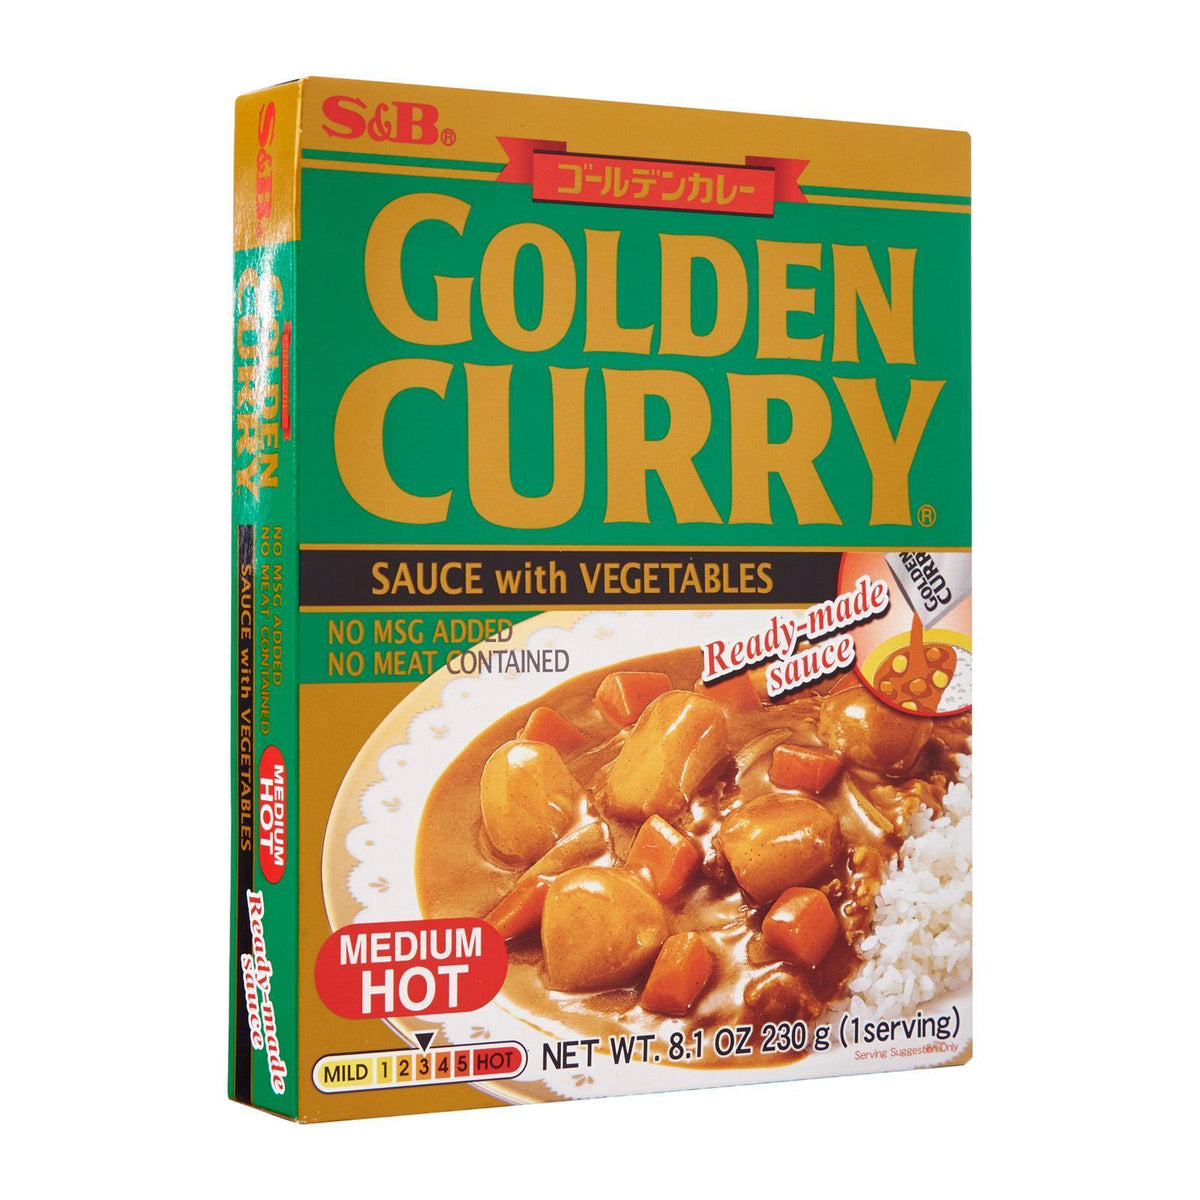 S&B Golden Curry Japanese Curry Mix Sauce 7.8 US Seller ; Single  Box/Mix 4 Box